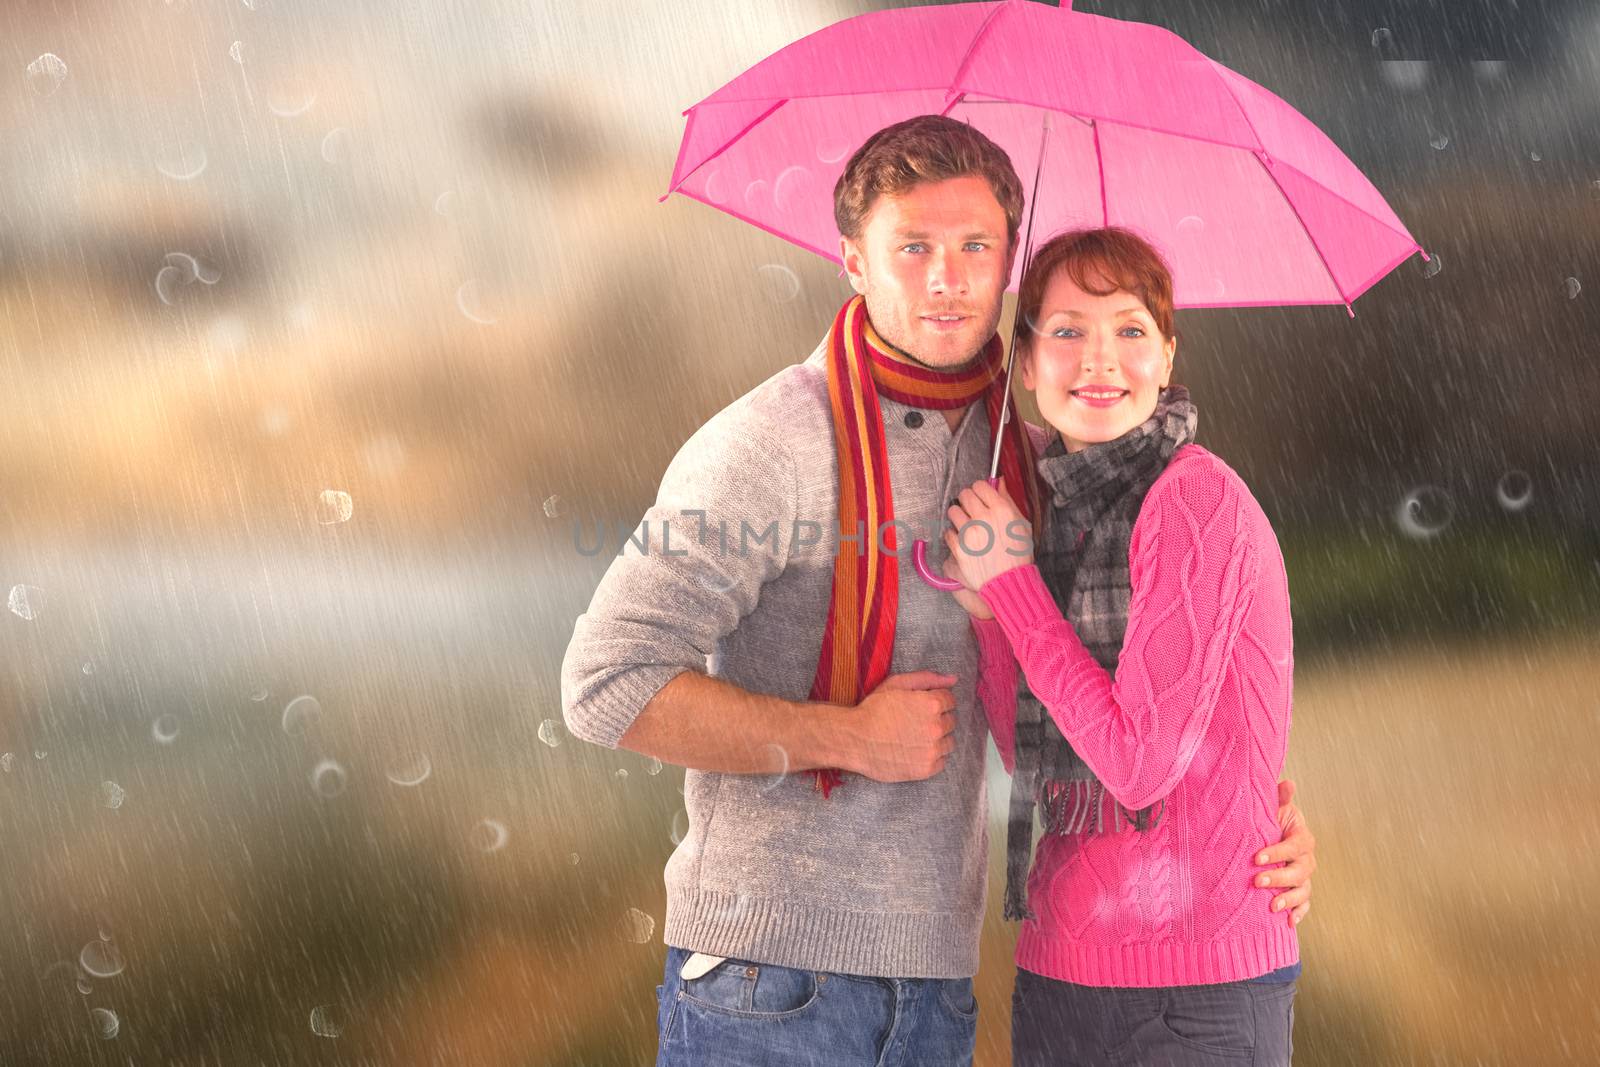 Couple standing underneath an umbrella against country scene